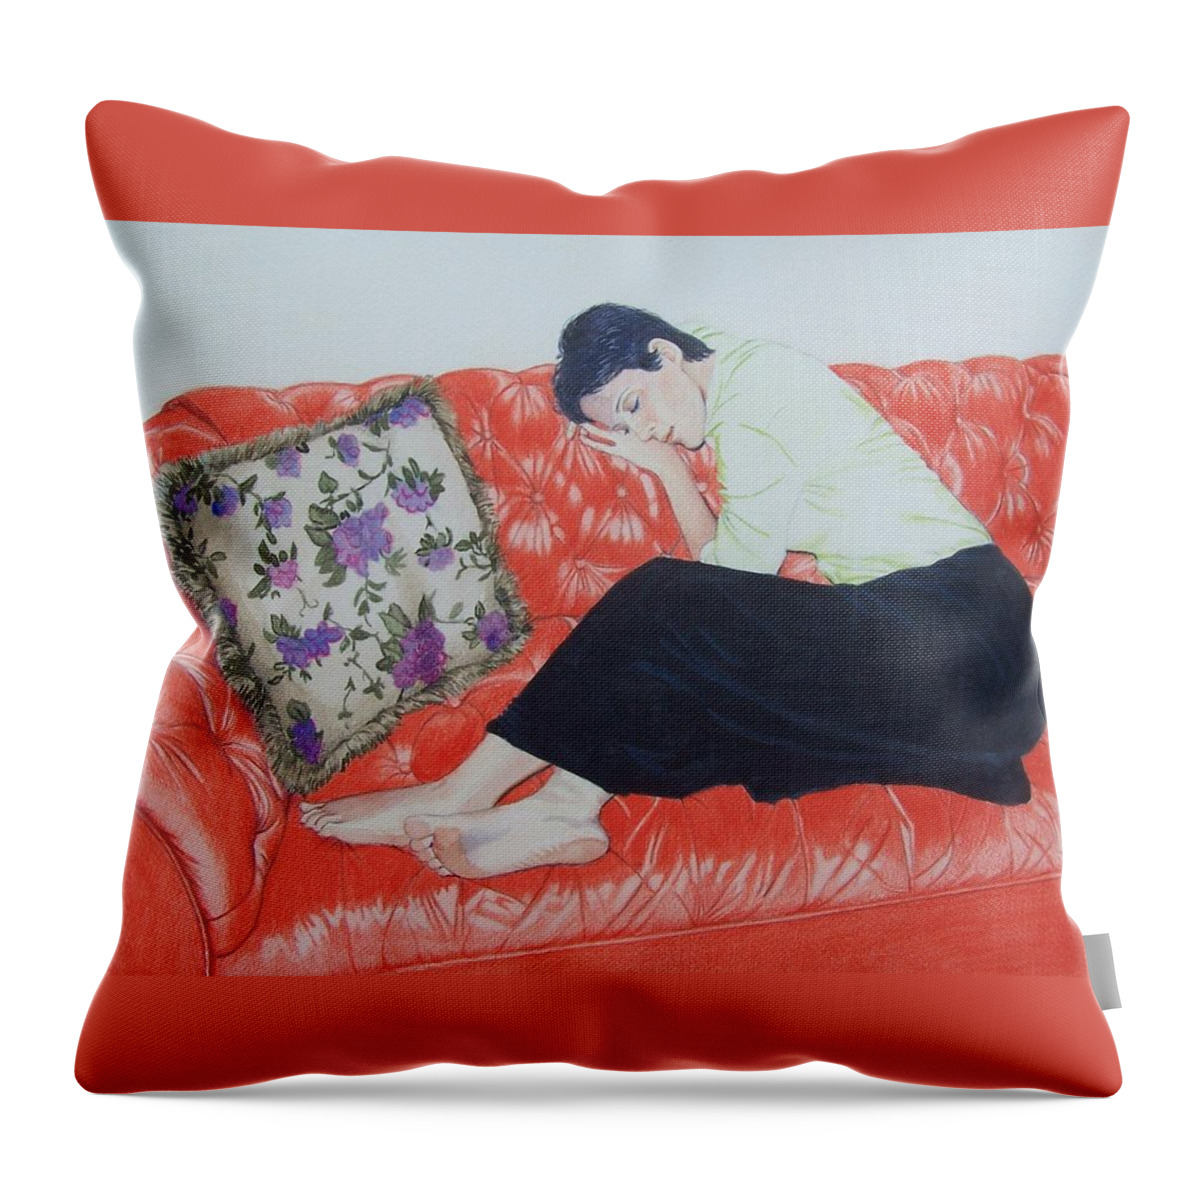 Red Throw Pillow featuring the mixed media The red sofa by Constance Drescher